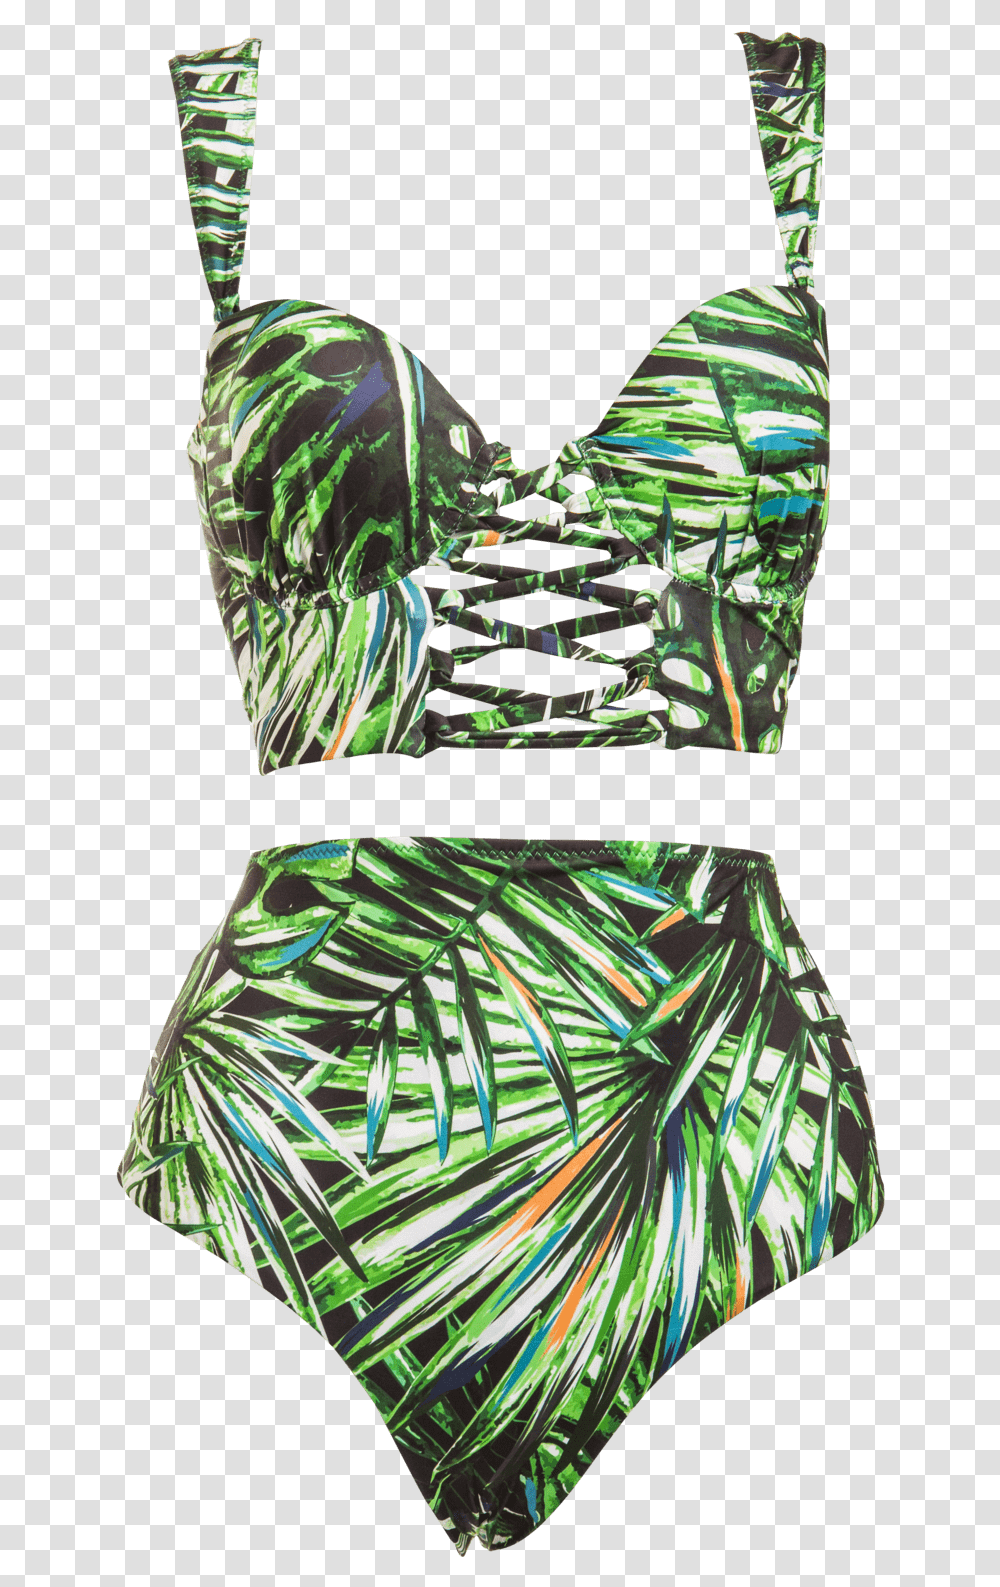 Swimsuit Top, Gemstone, Jewelry, Accessories Transparent Png